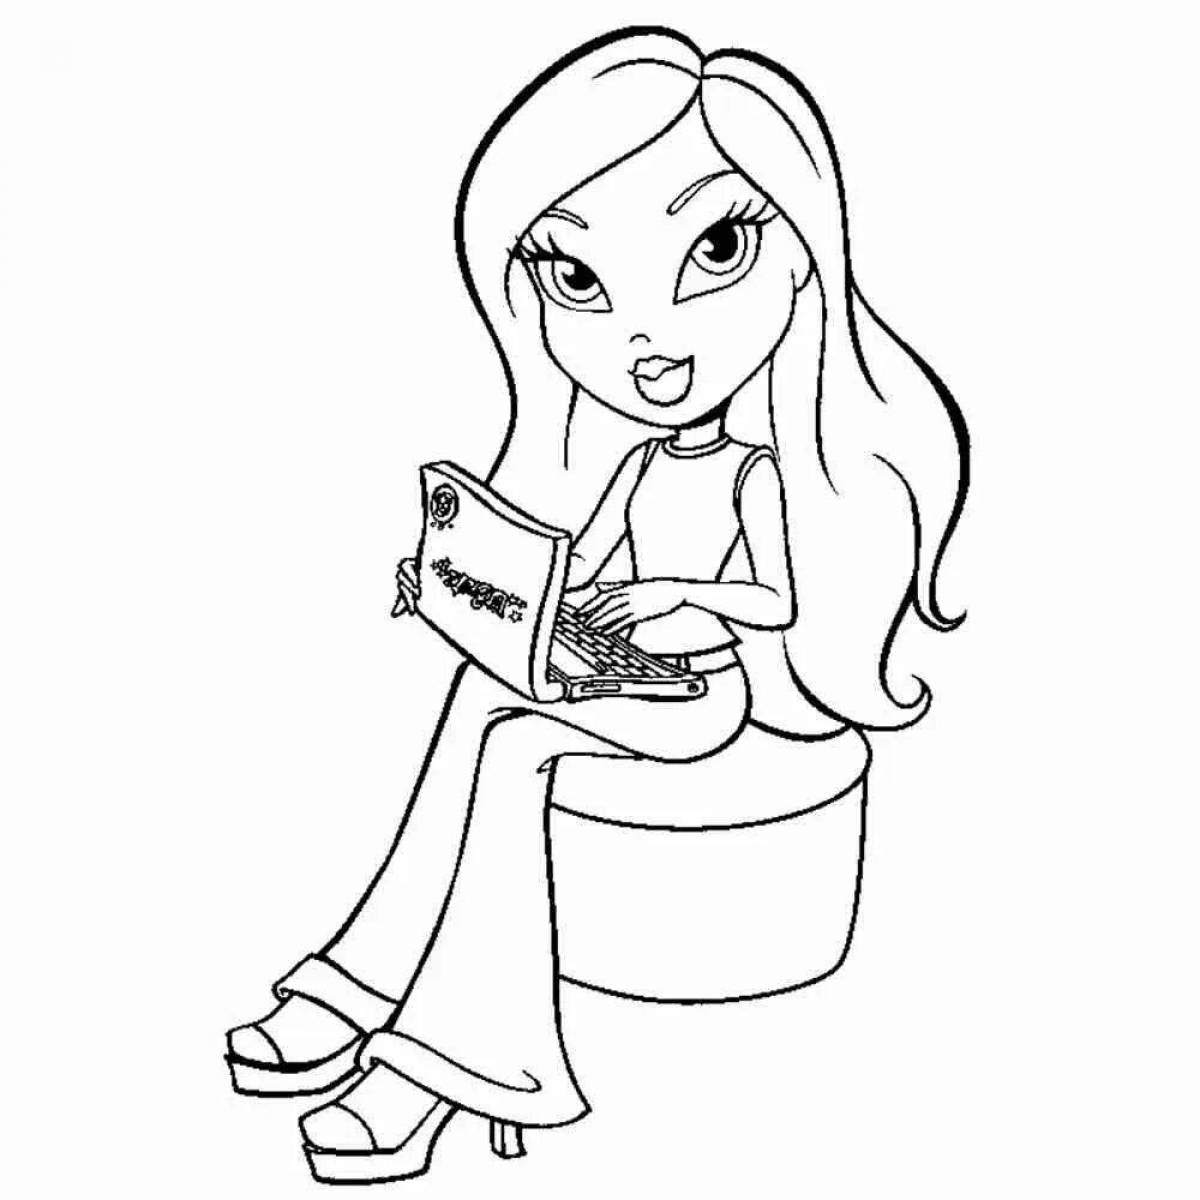 Cool fashionista coloring pages